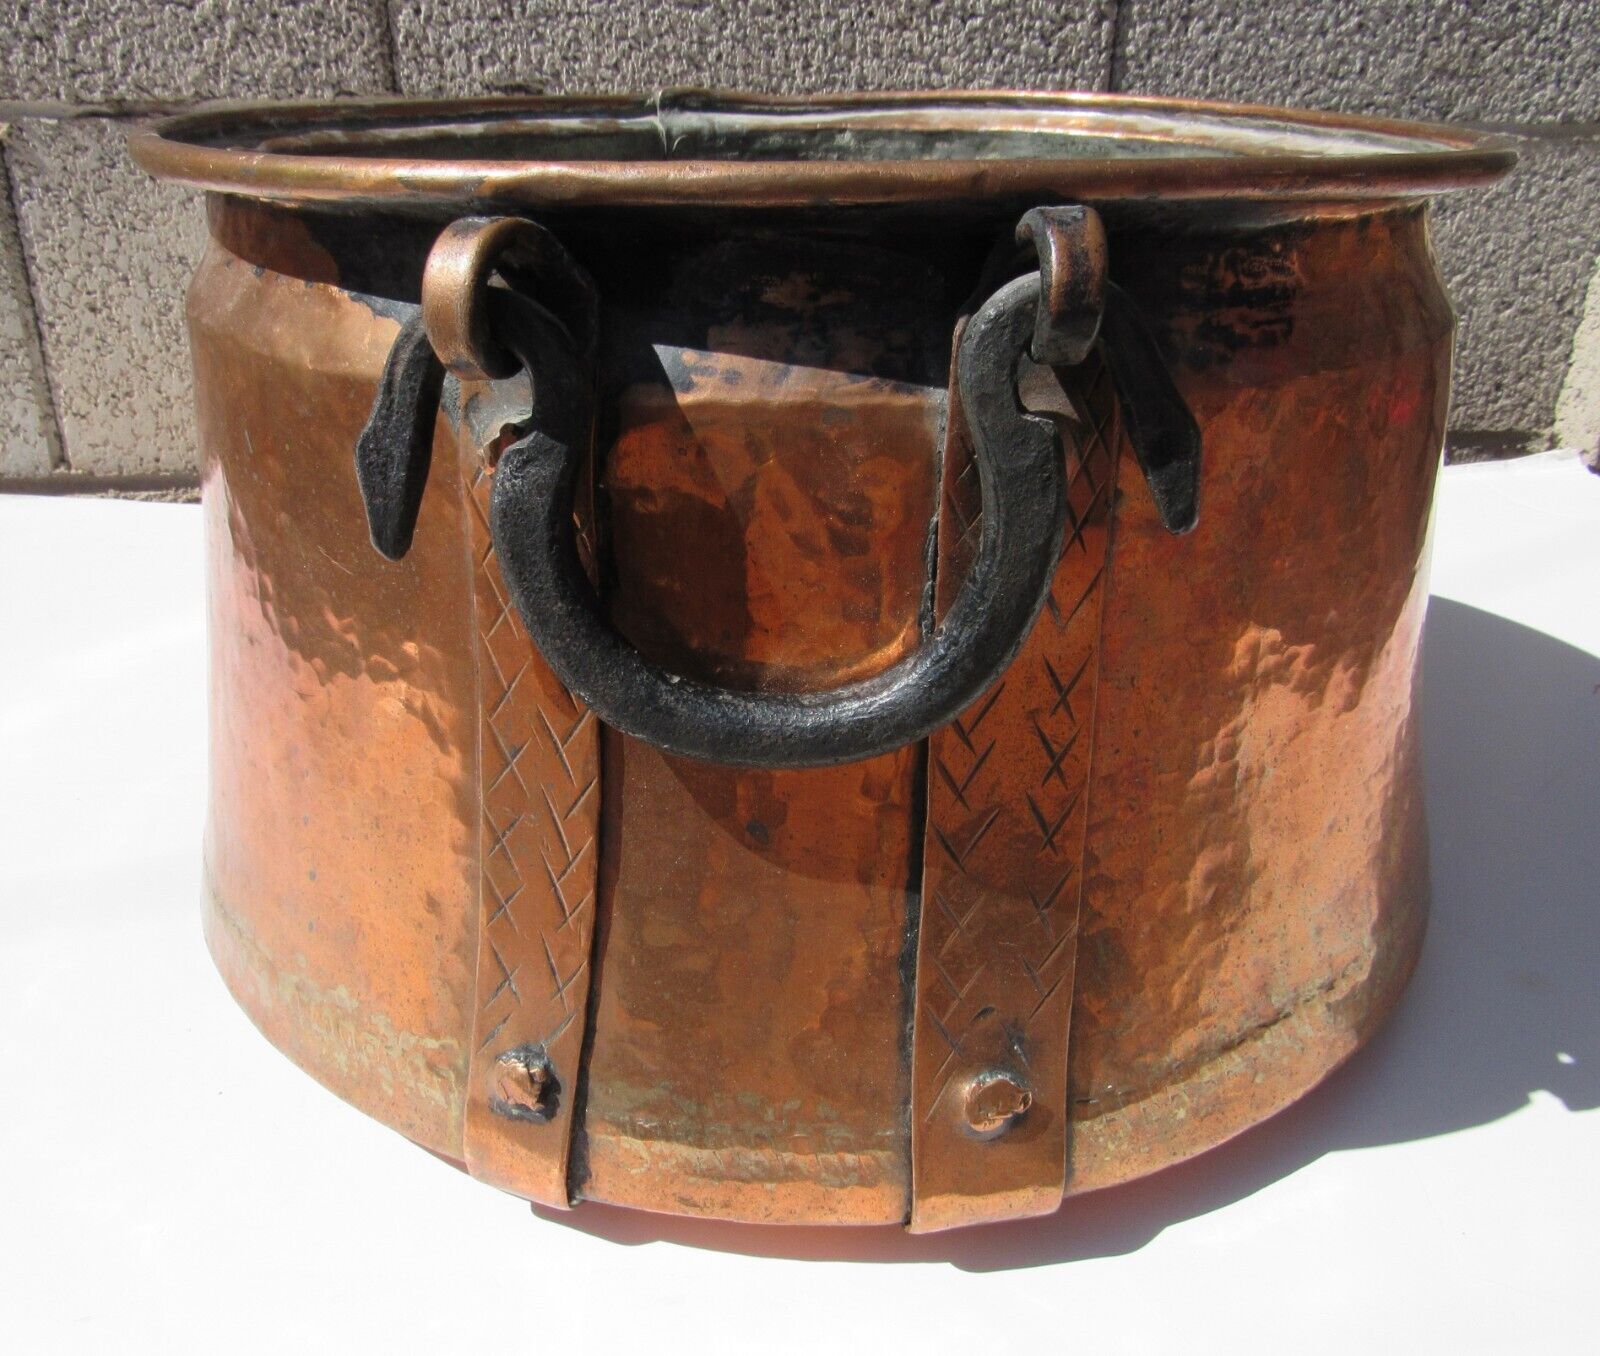 HUGE 19TH CENTURY ANTIQUE FRENCH DOVETAILED COPPER CAULDRON POT W/HANDLES TINNED